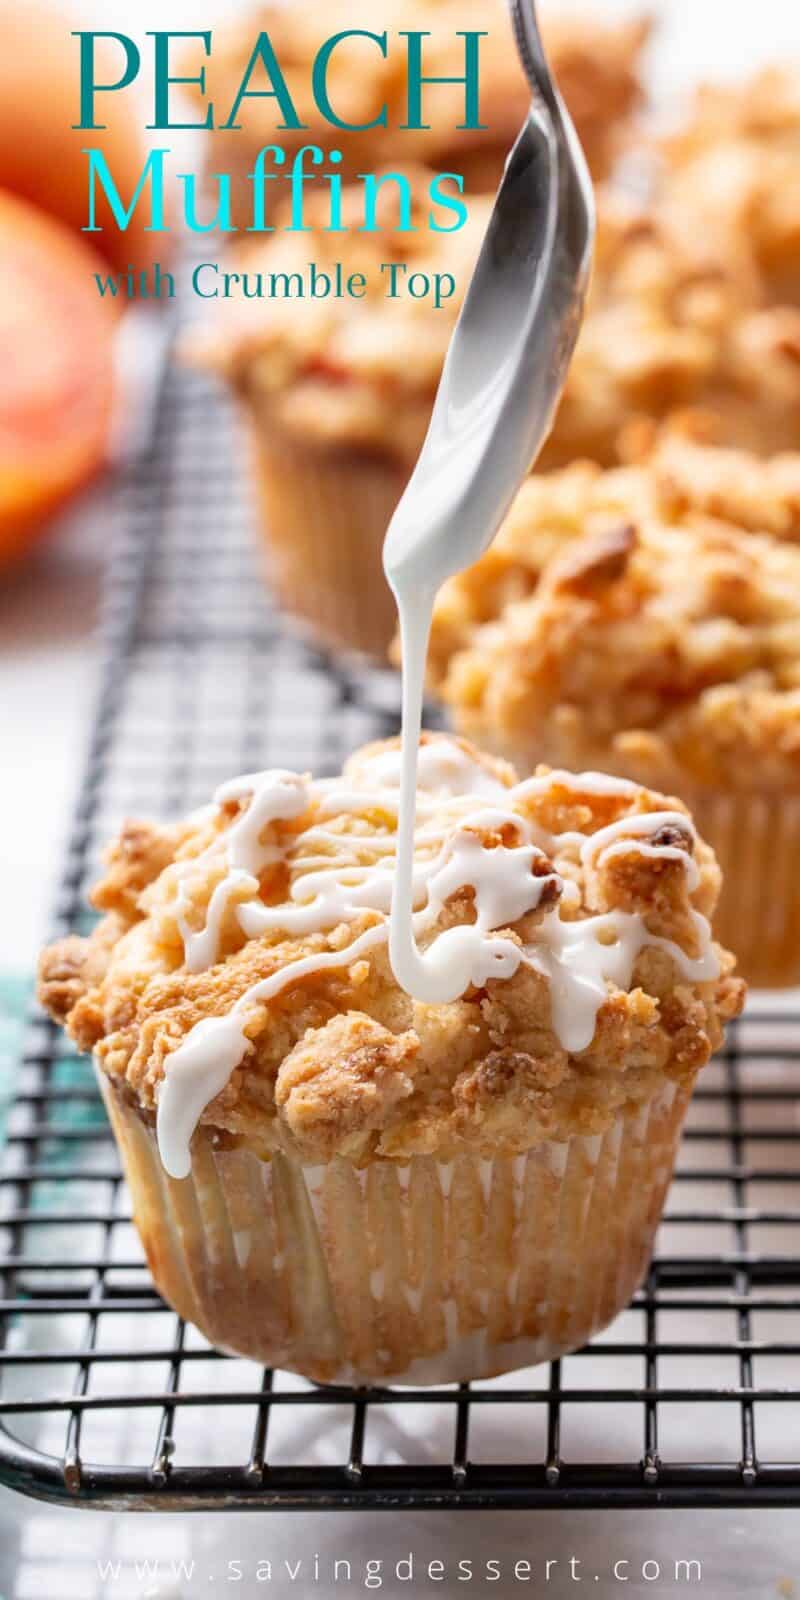 A large peach muffin being drizzled with almond icing from a spoon